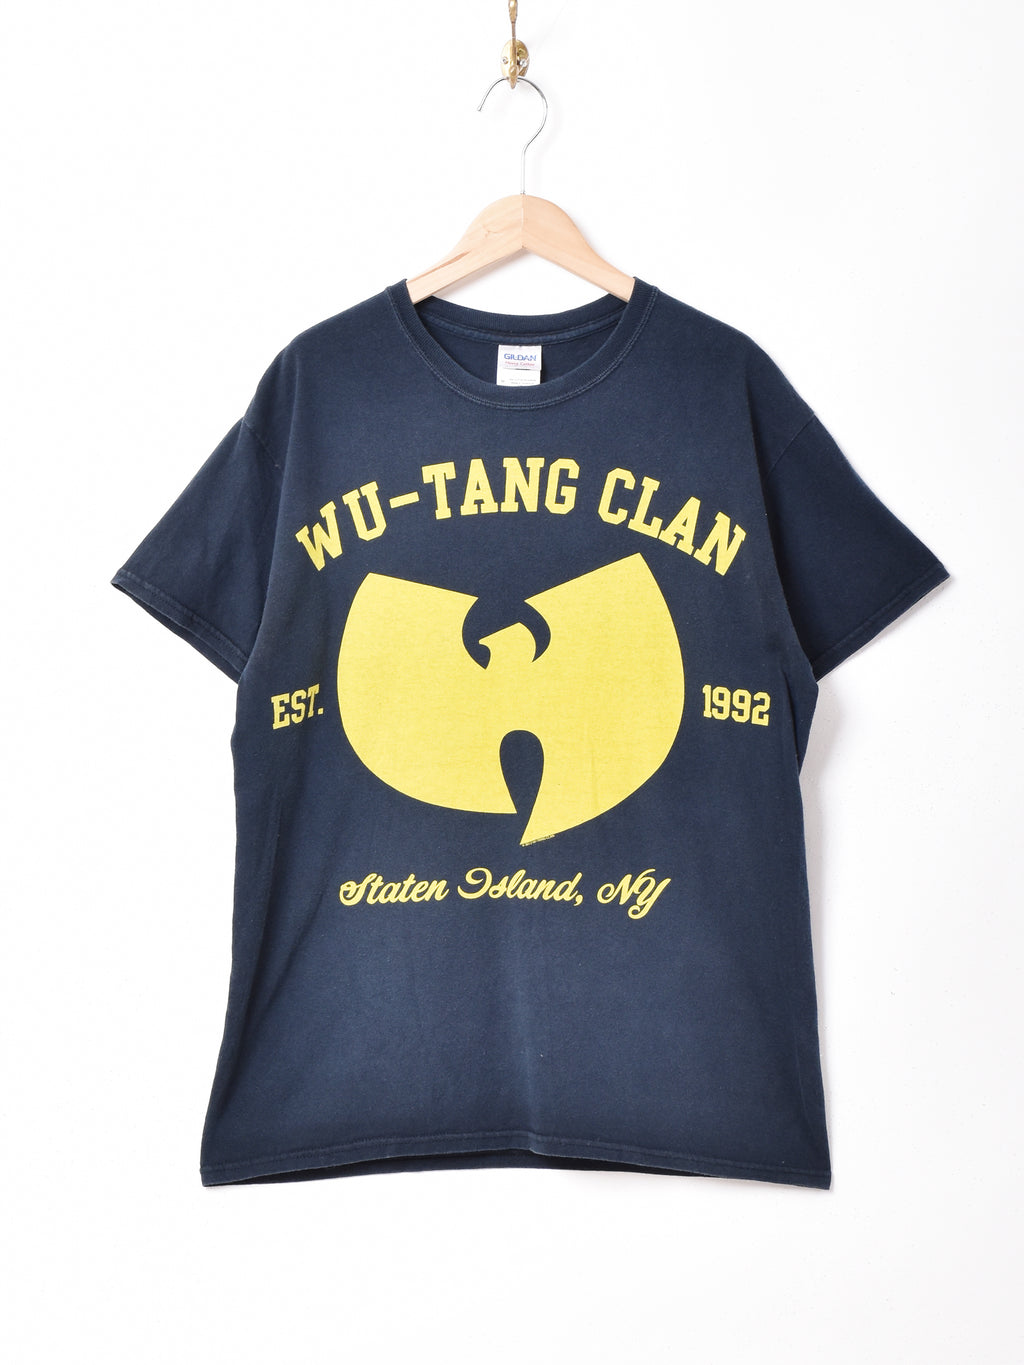 Wu-Tang Clan プリントTシャツ – 古着屋Top of the Hillのネット通販サイト